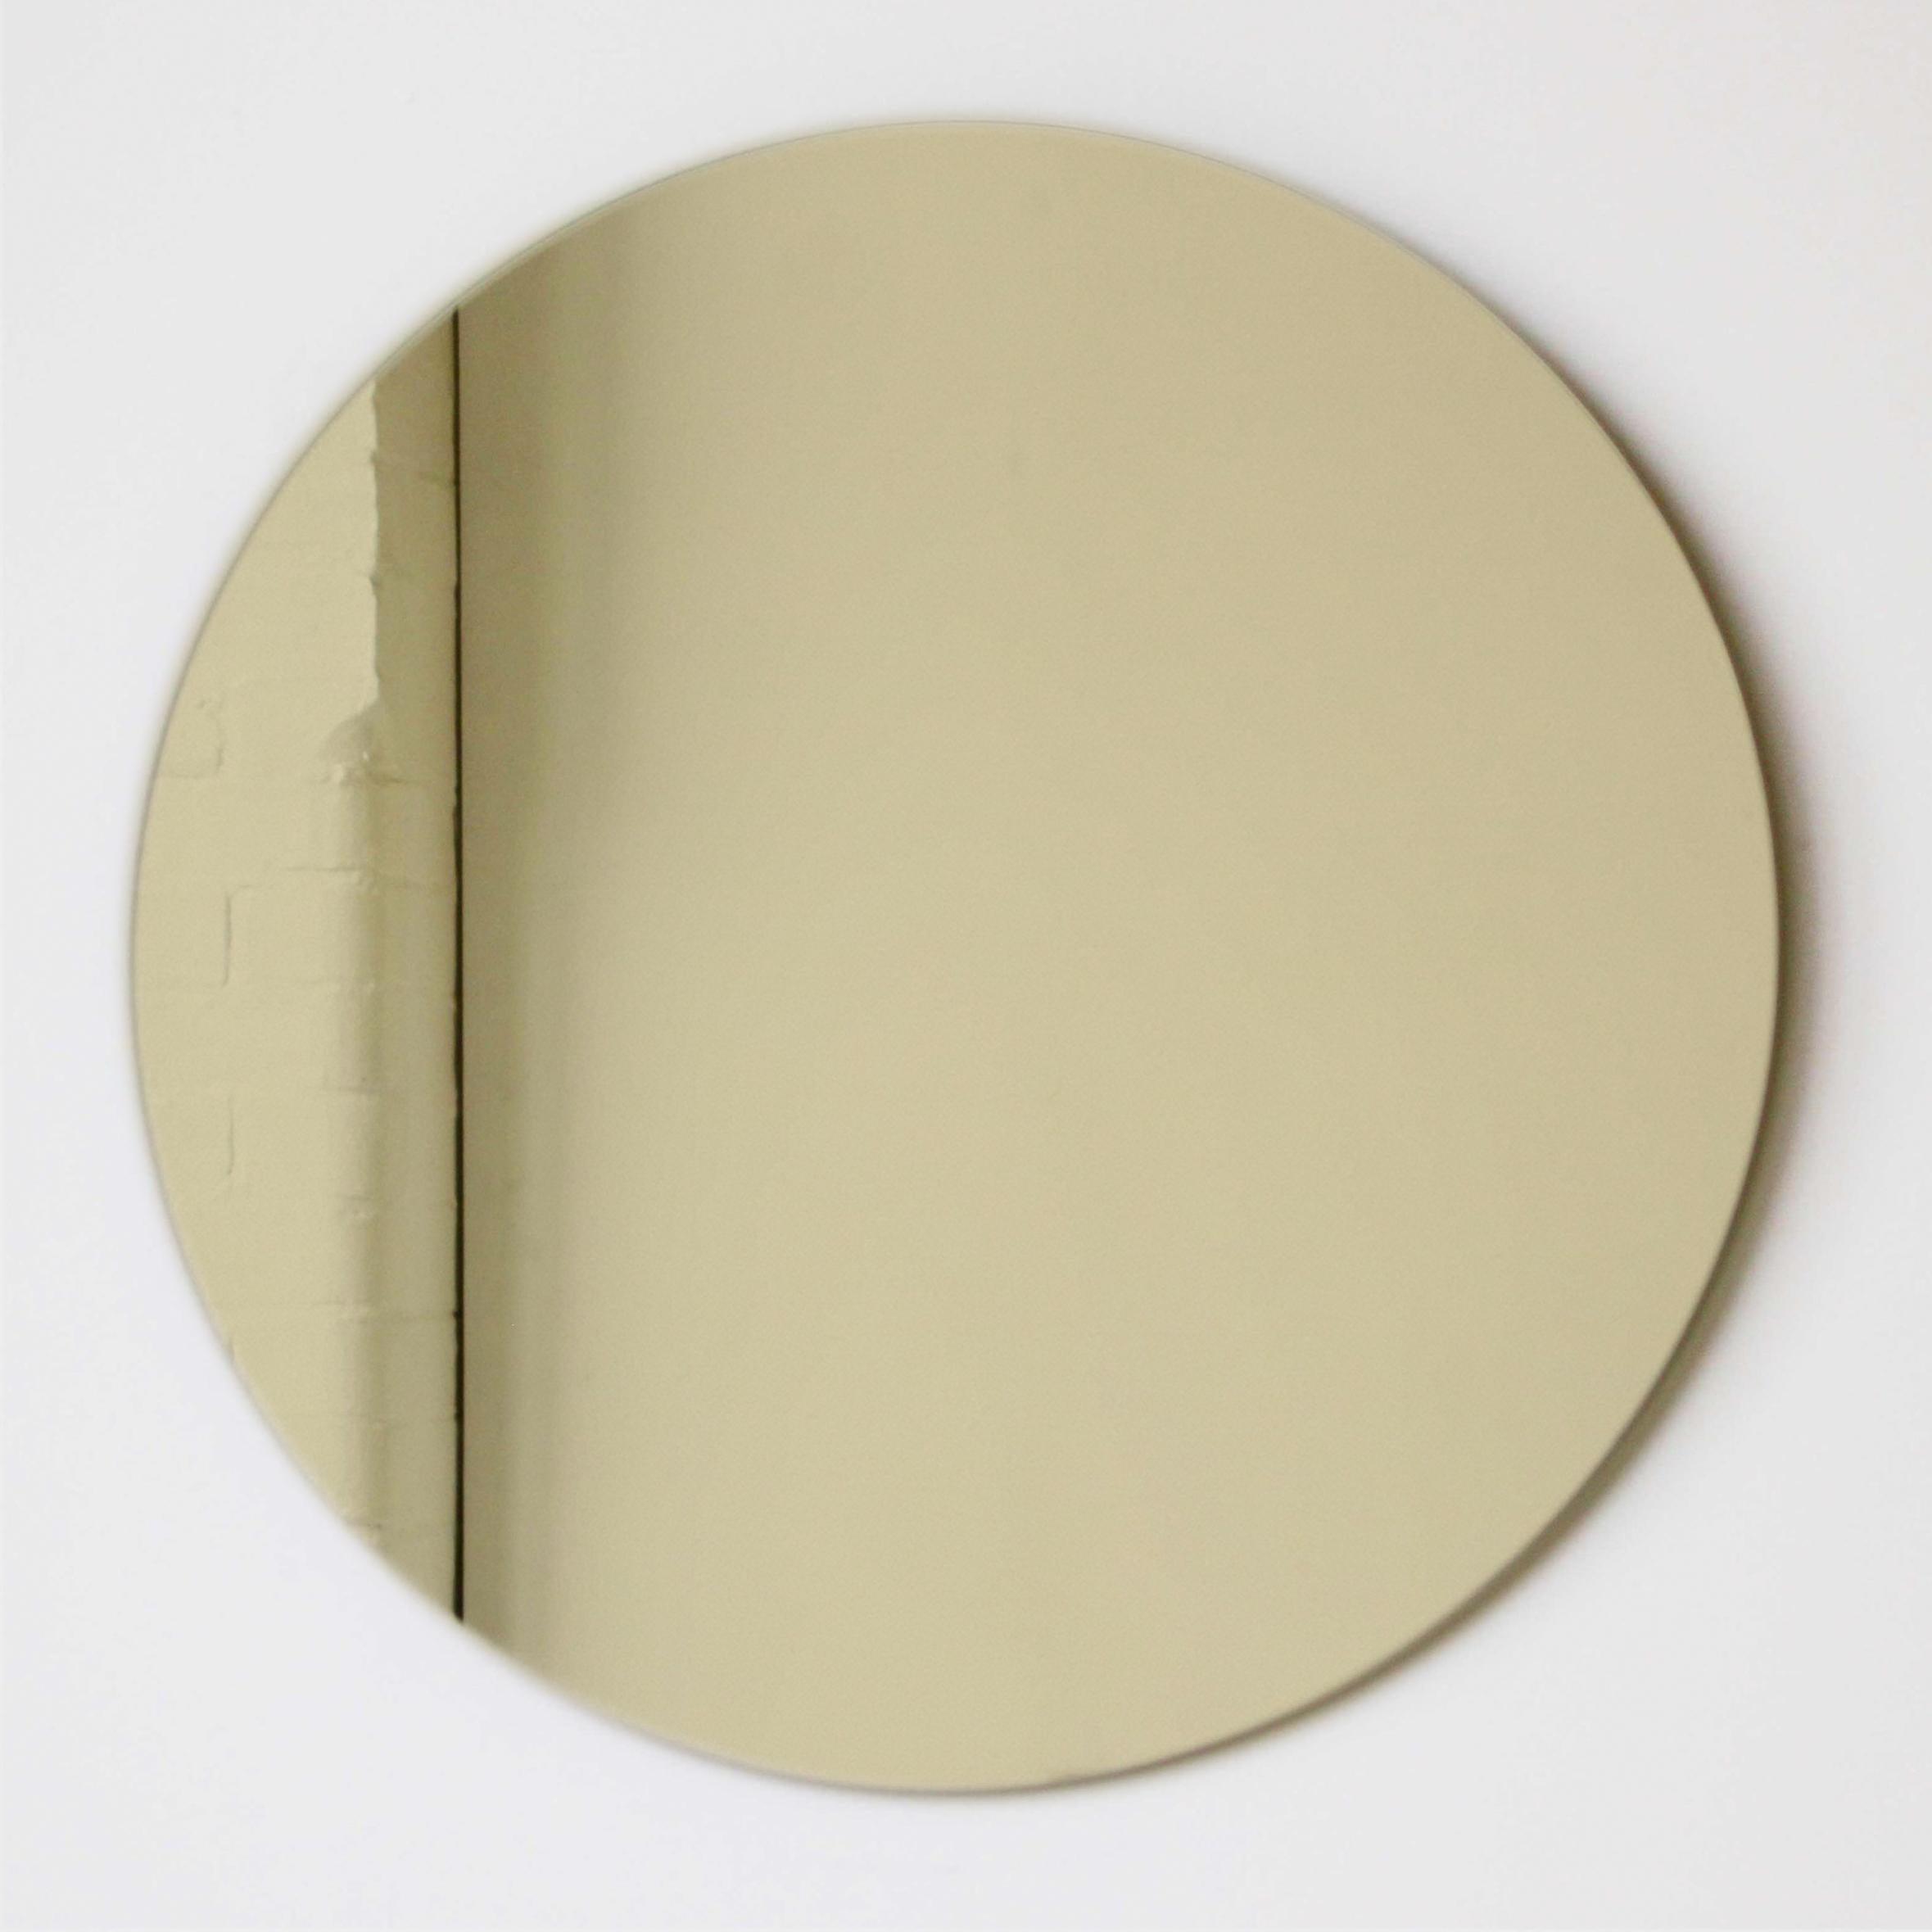 Charming and minimalist round frameless gold tinted mirror with a floating effect. Quality design that ensures the mirror sits perfectly parallel to the wall. Designed and made in London, UK.

Fitted with professional plates not visible once